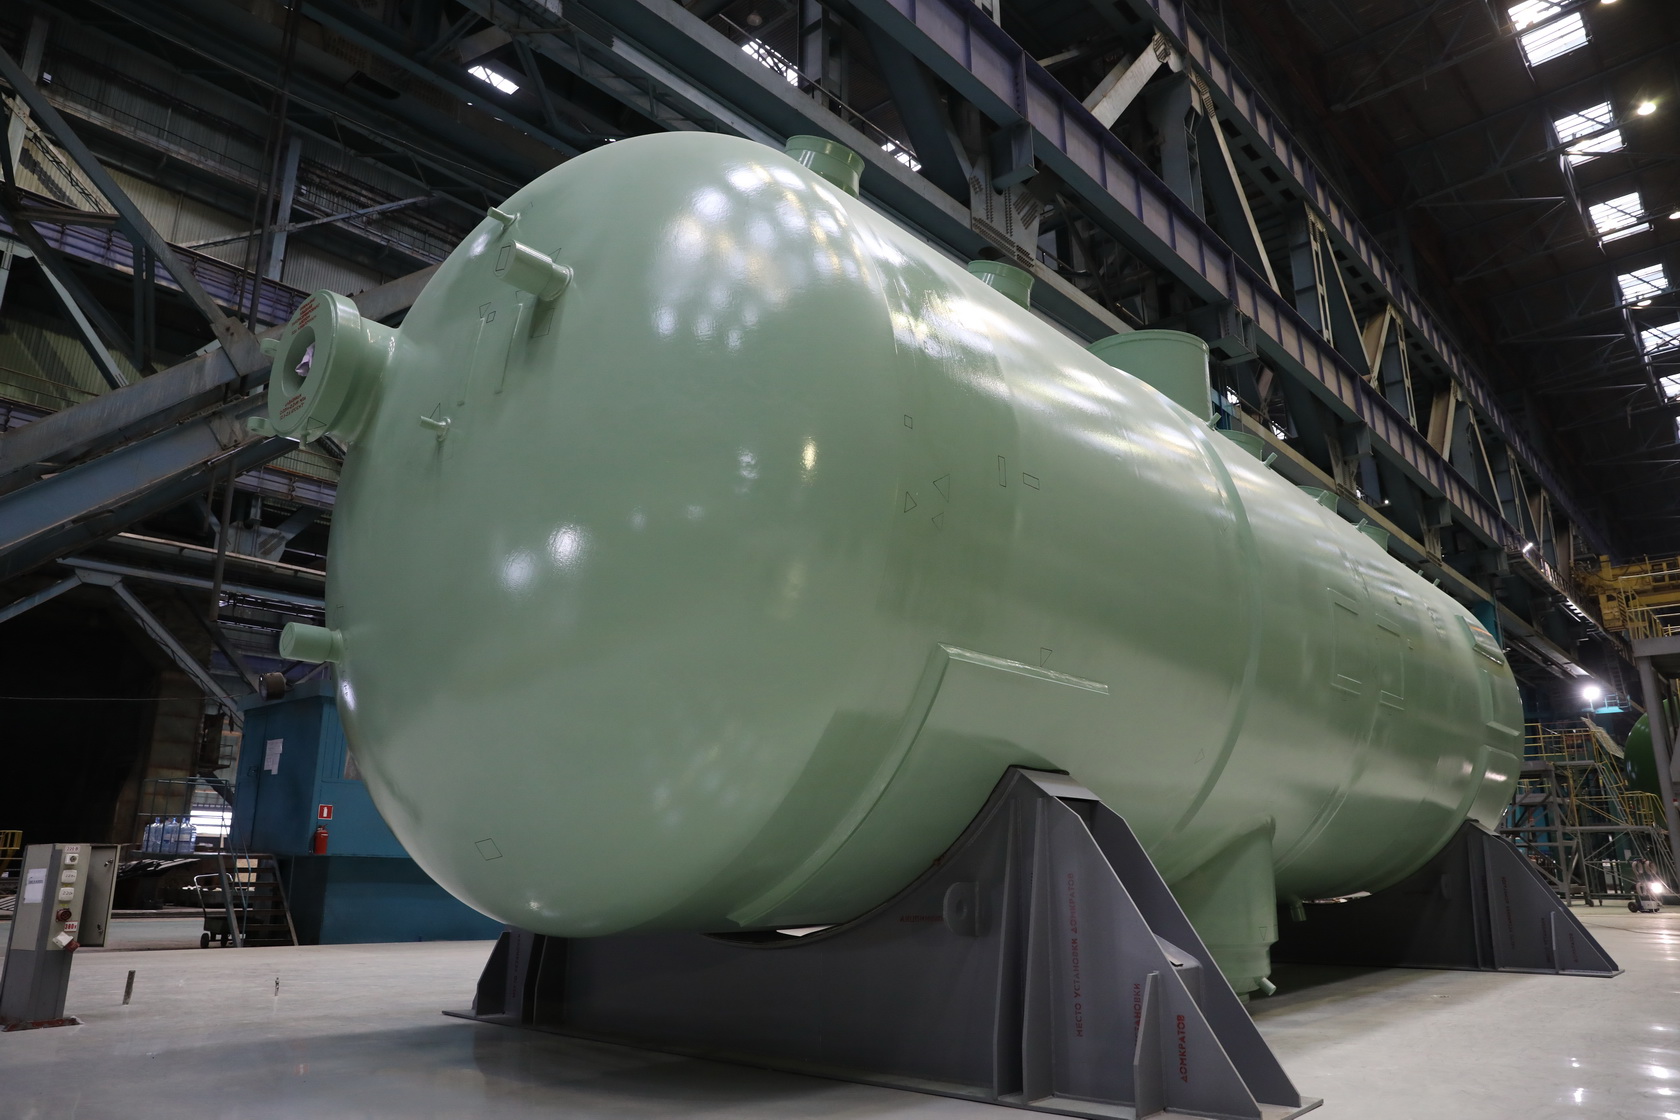 Atommash has manufactured the set of Steam Generators for the Unit No. 4 of Kudankulam NPP in India